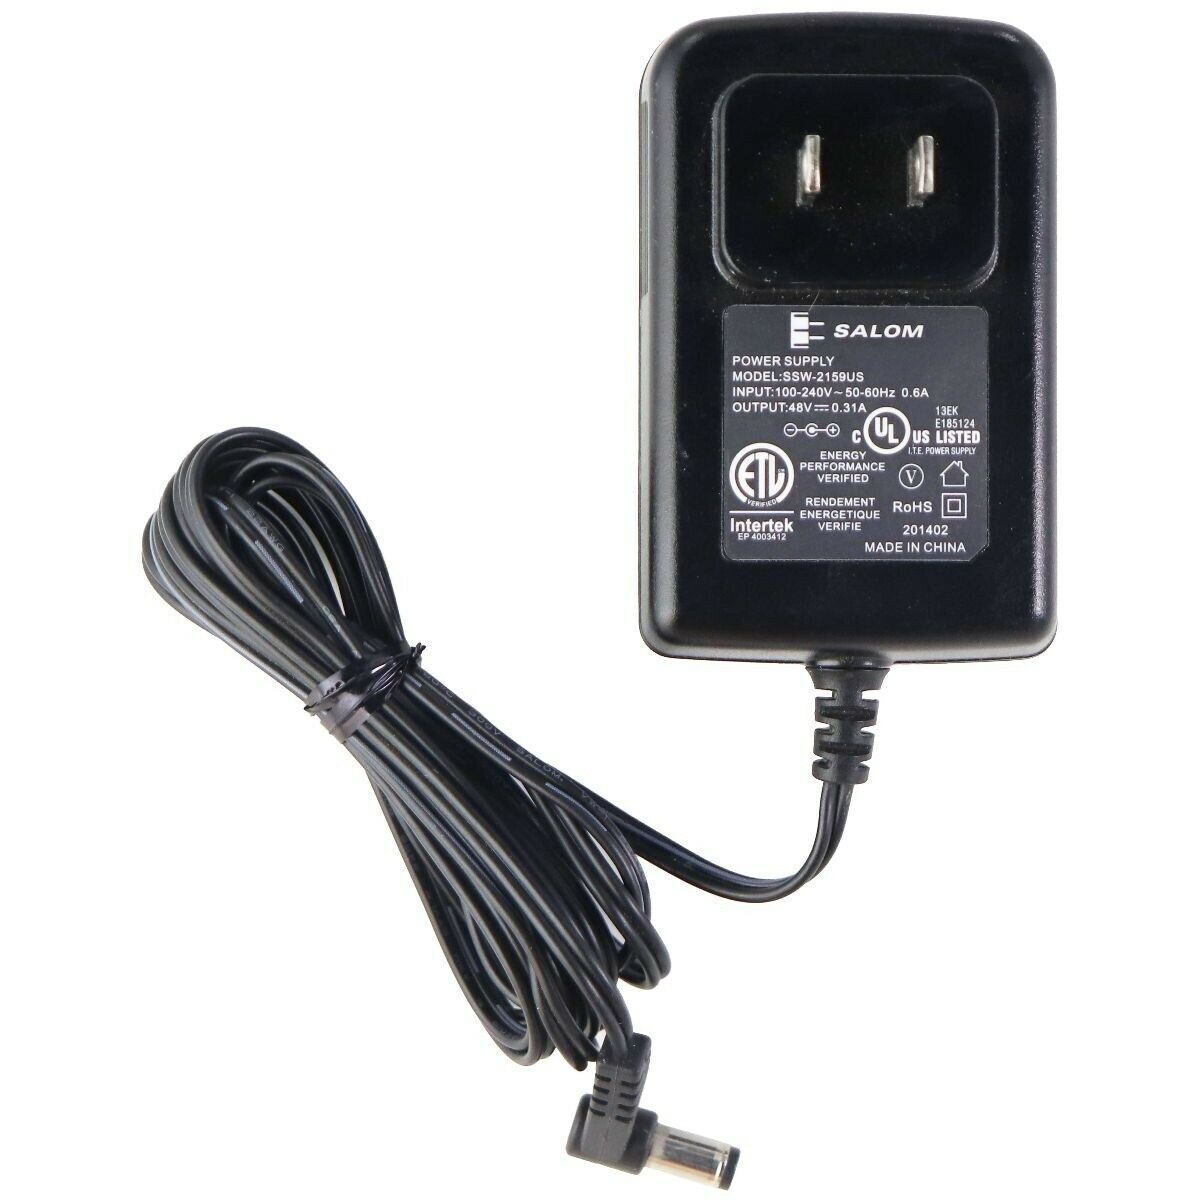 Salom (48V/0.31A) Power Supply Wall Charger / Adapter - Black (SSW-2159US) Brand: Salom MPN: SSW-2159US UPC: 625771 - Click Image to Close